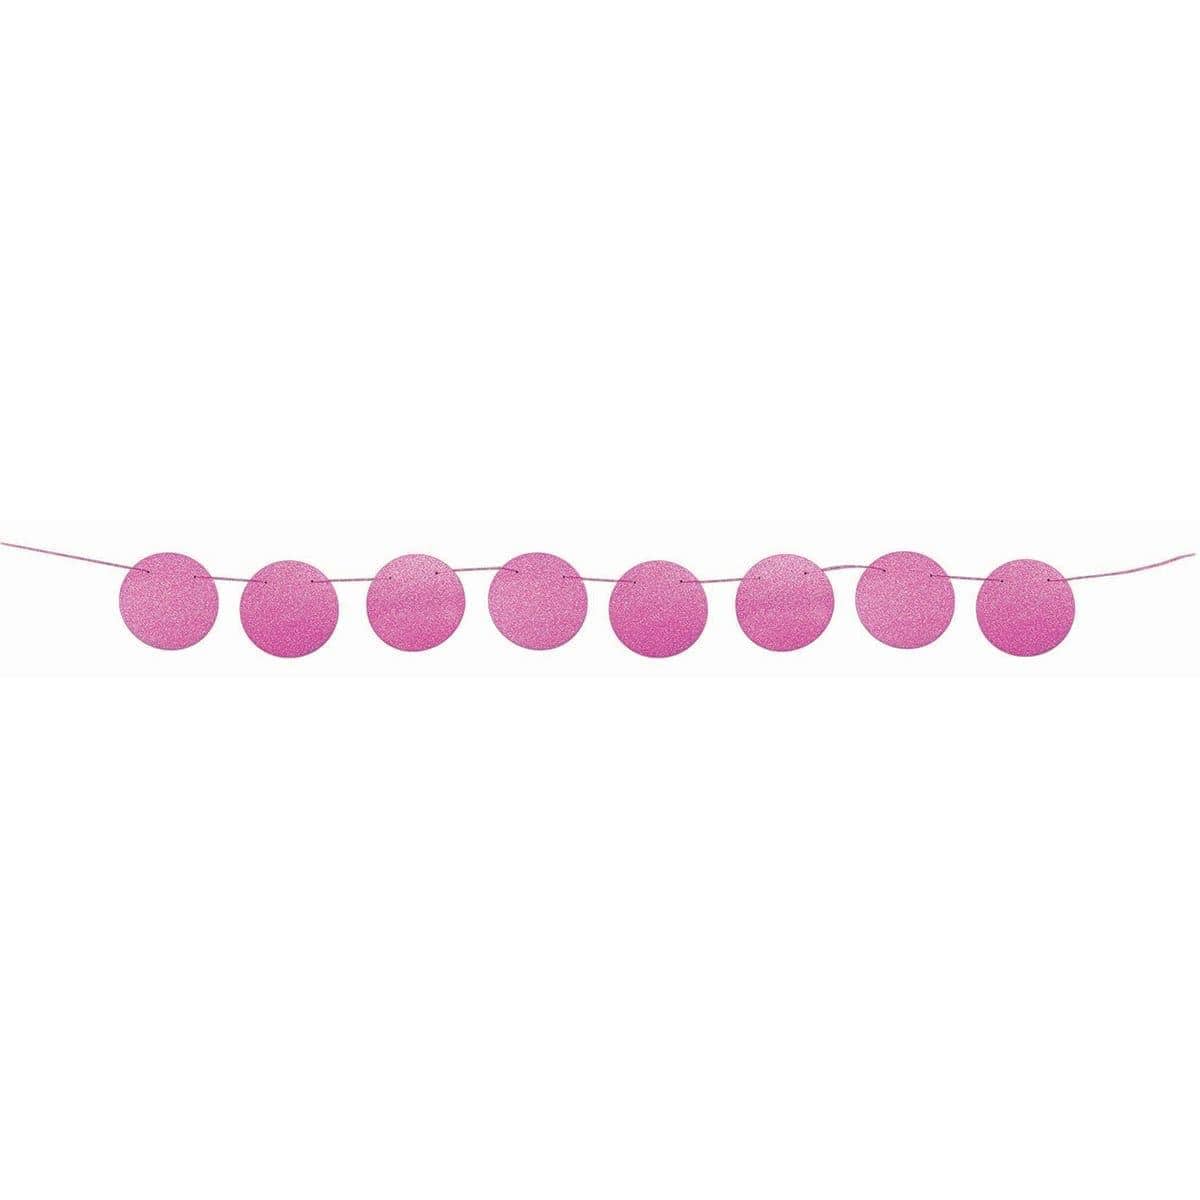 Buy Decorations Diamond Circles Banner 8ft. - Hot Pink sold at Party Expert